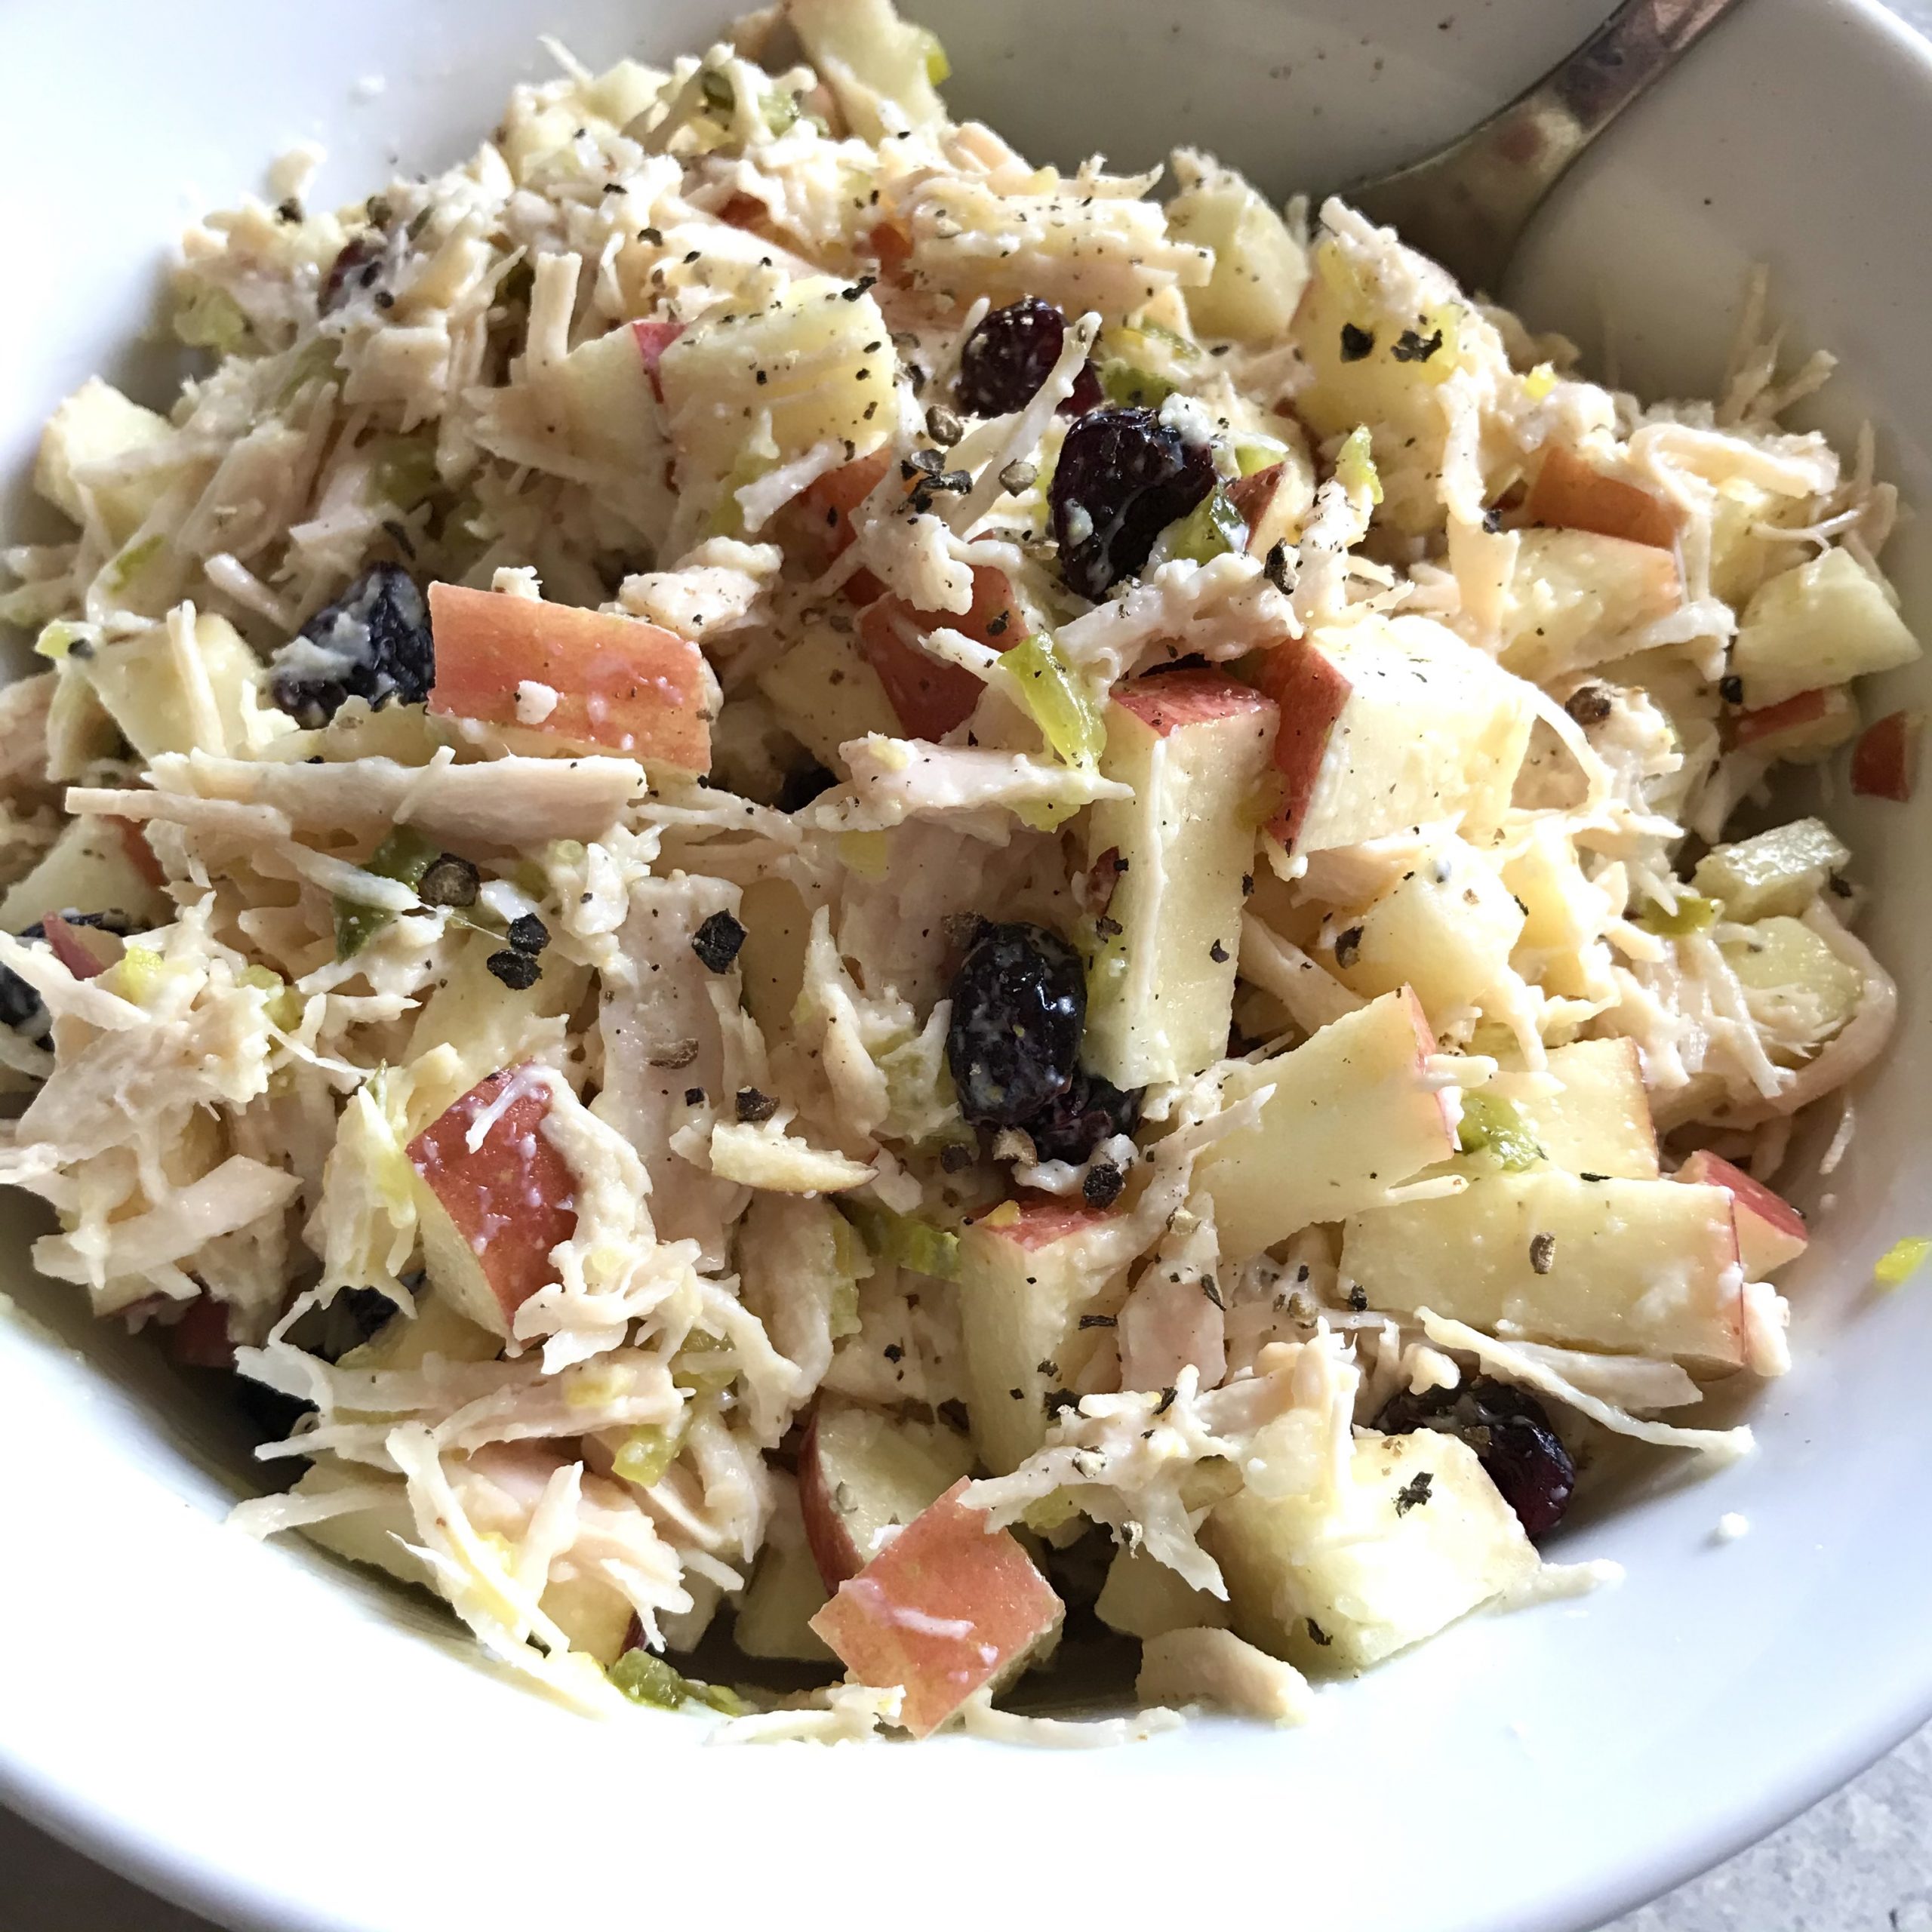 My Favorite Chicken Salad Recipe – Made with Costco Canned Chicken